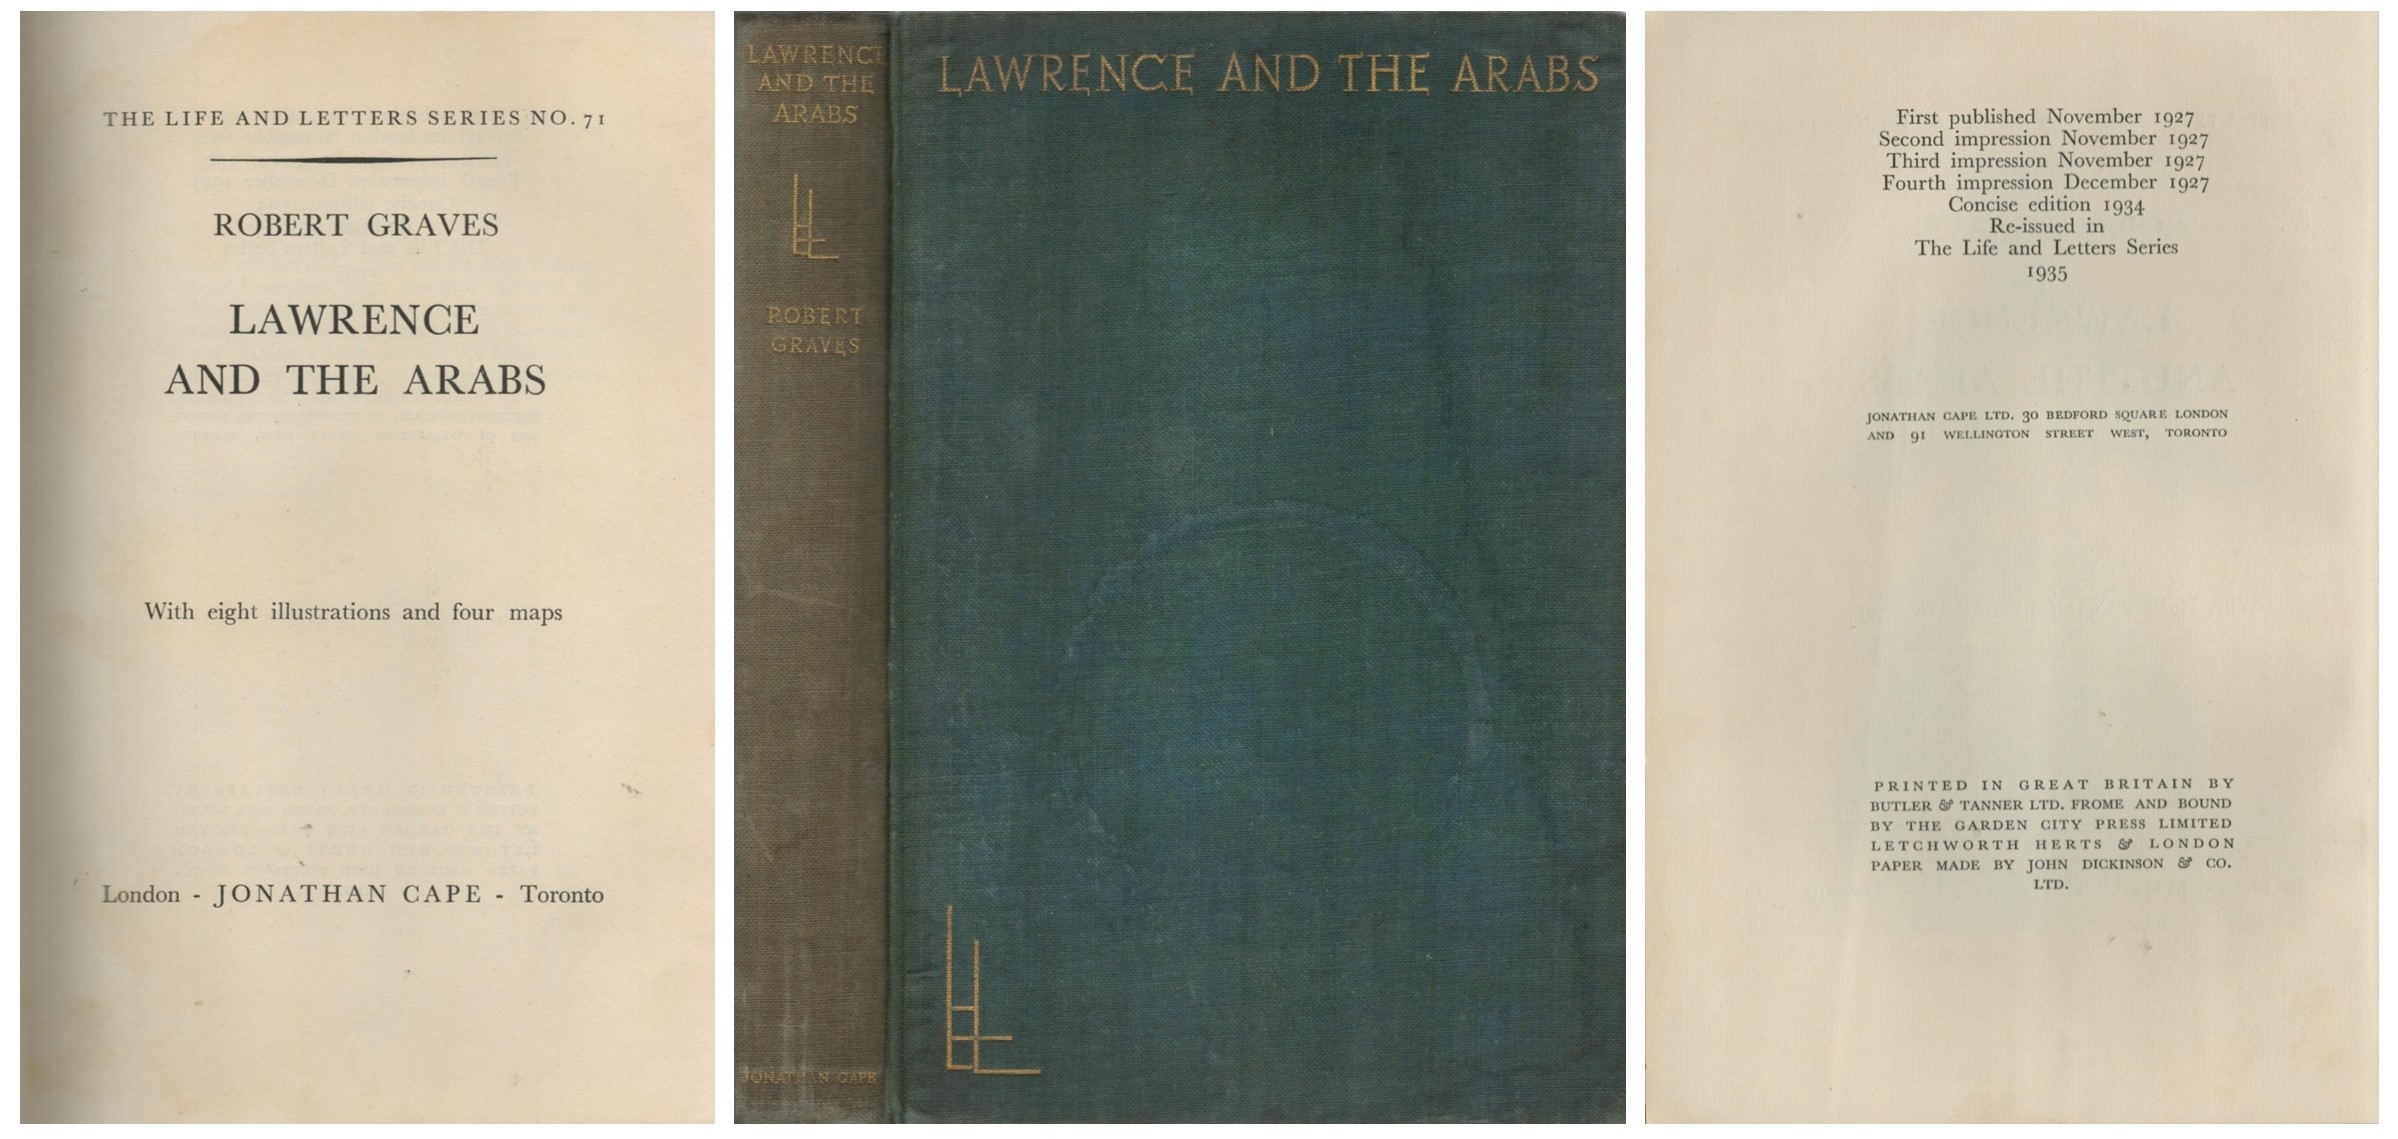 Lawrence And The Arabs. The Life & Letters Series 1935, Volume 7 I. Hardback book. Robert Graves. - Image 4 of 6